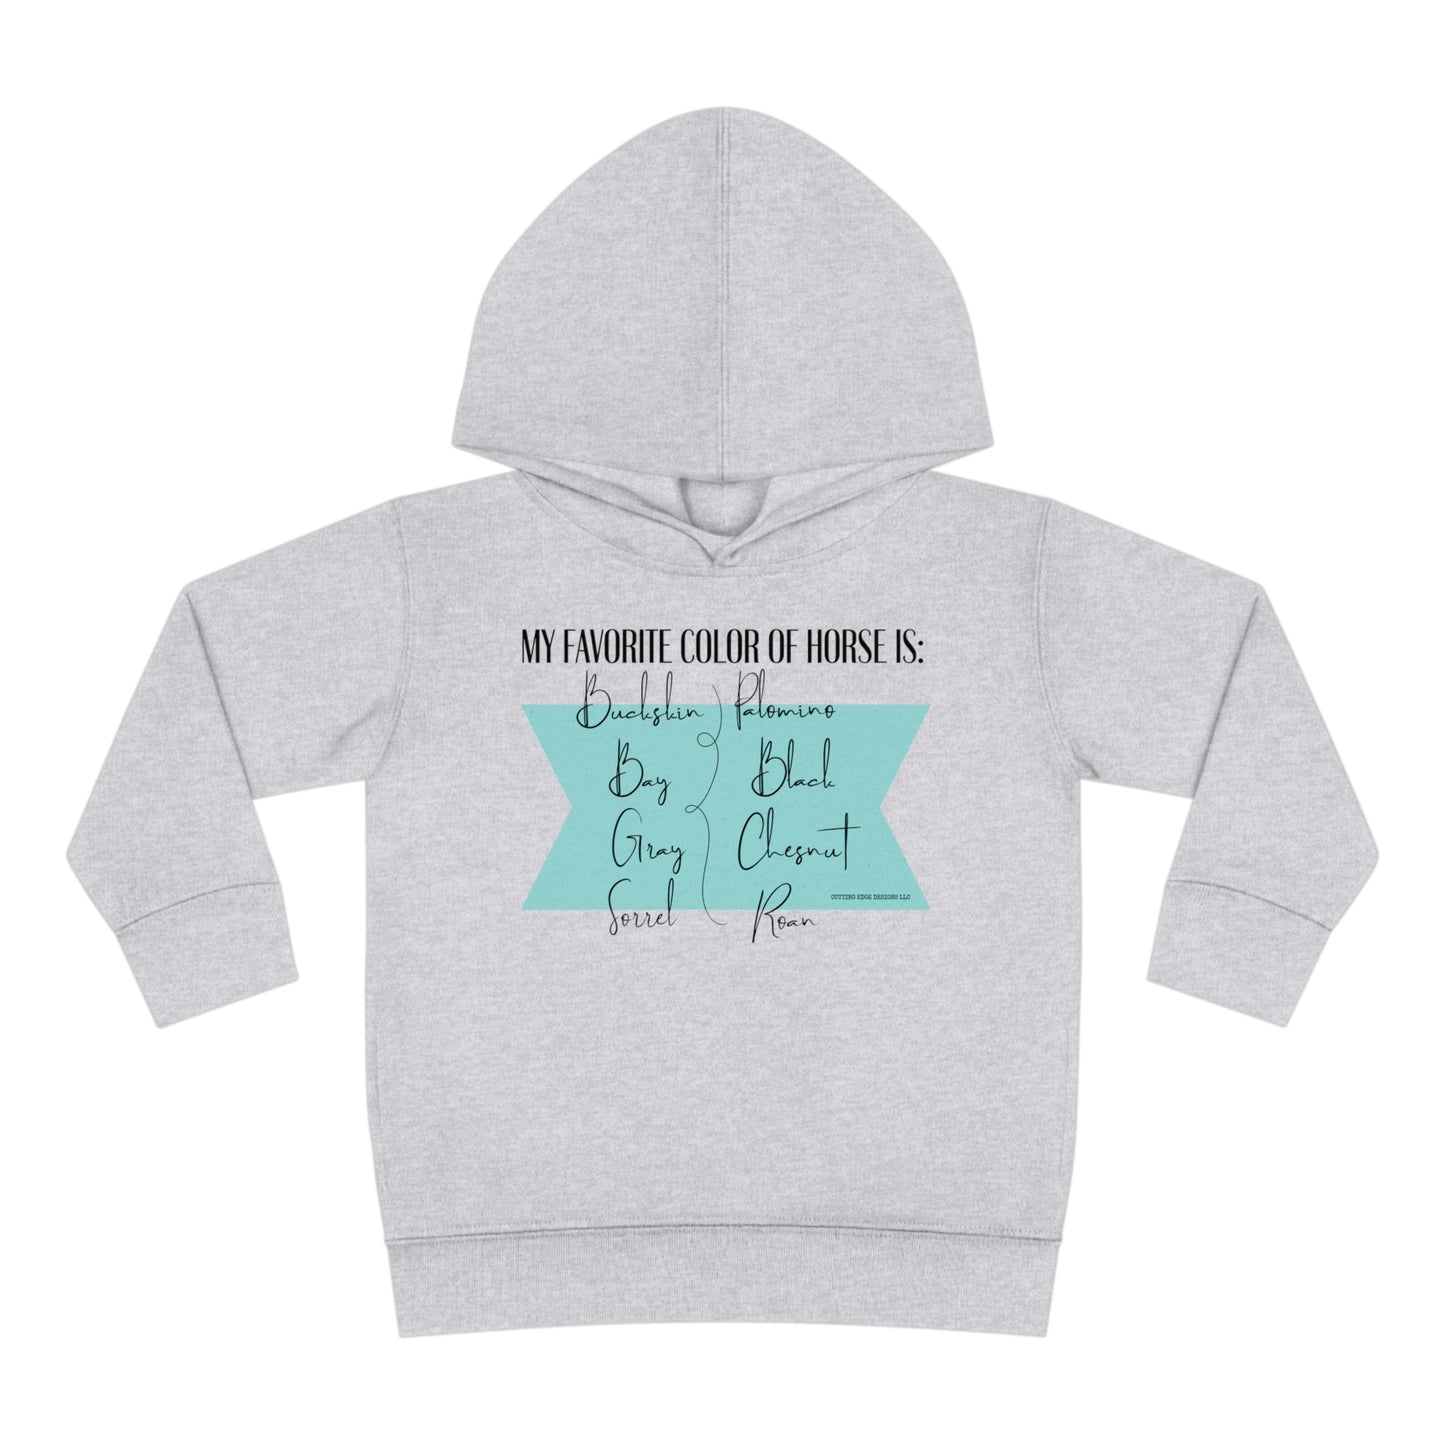 All The Pretty Horses Toddler Girls Hoodie